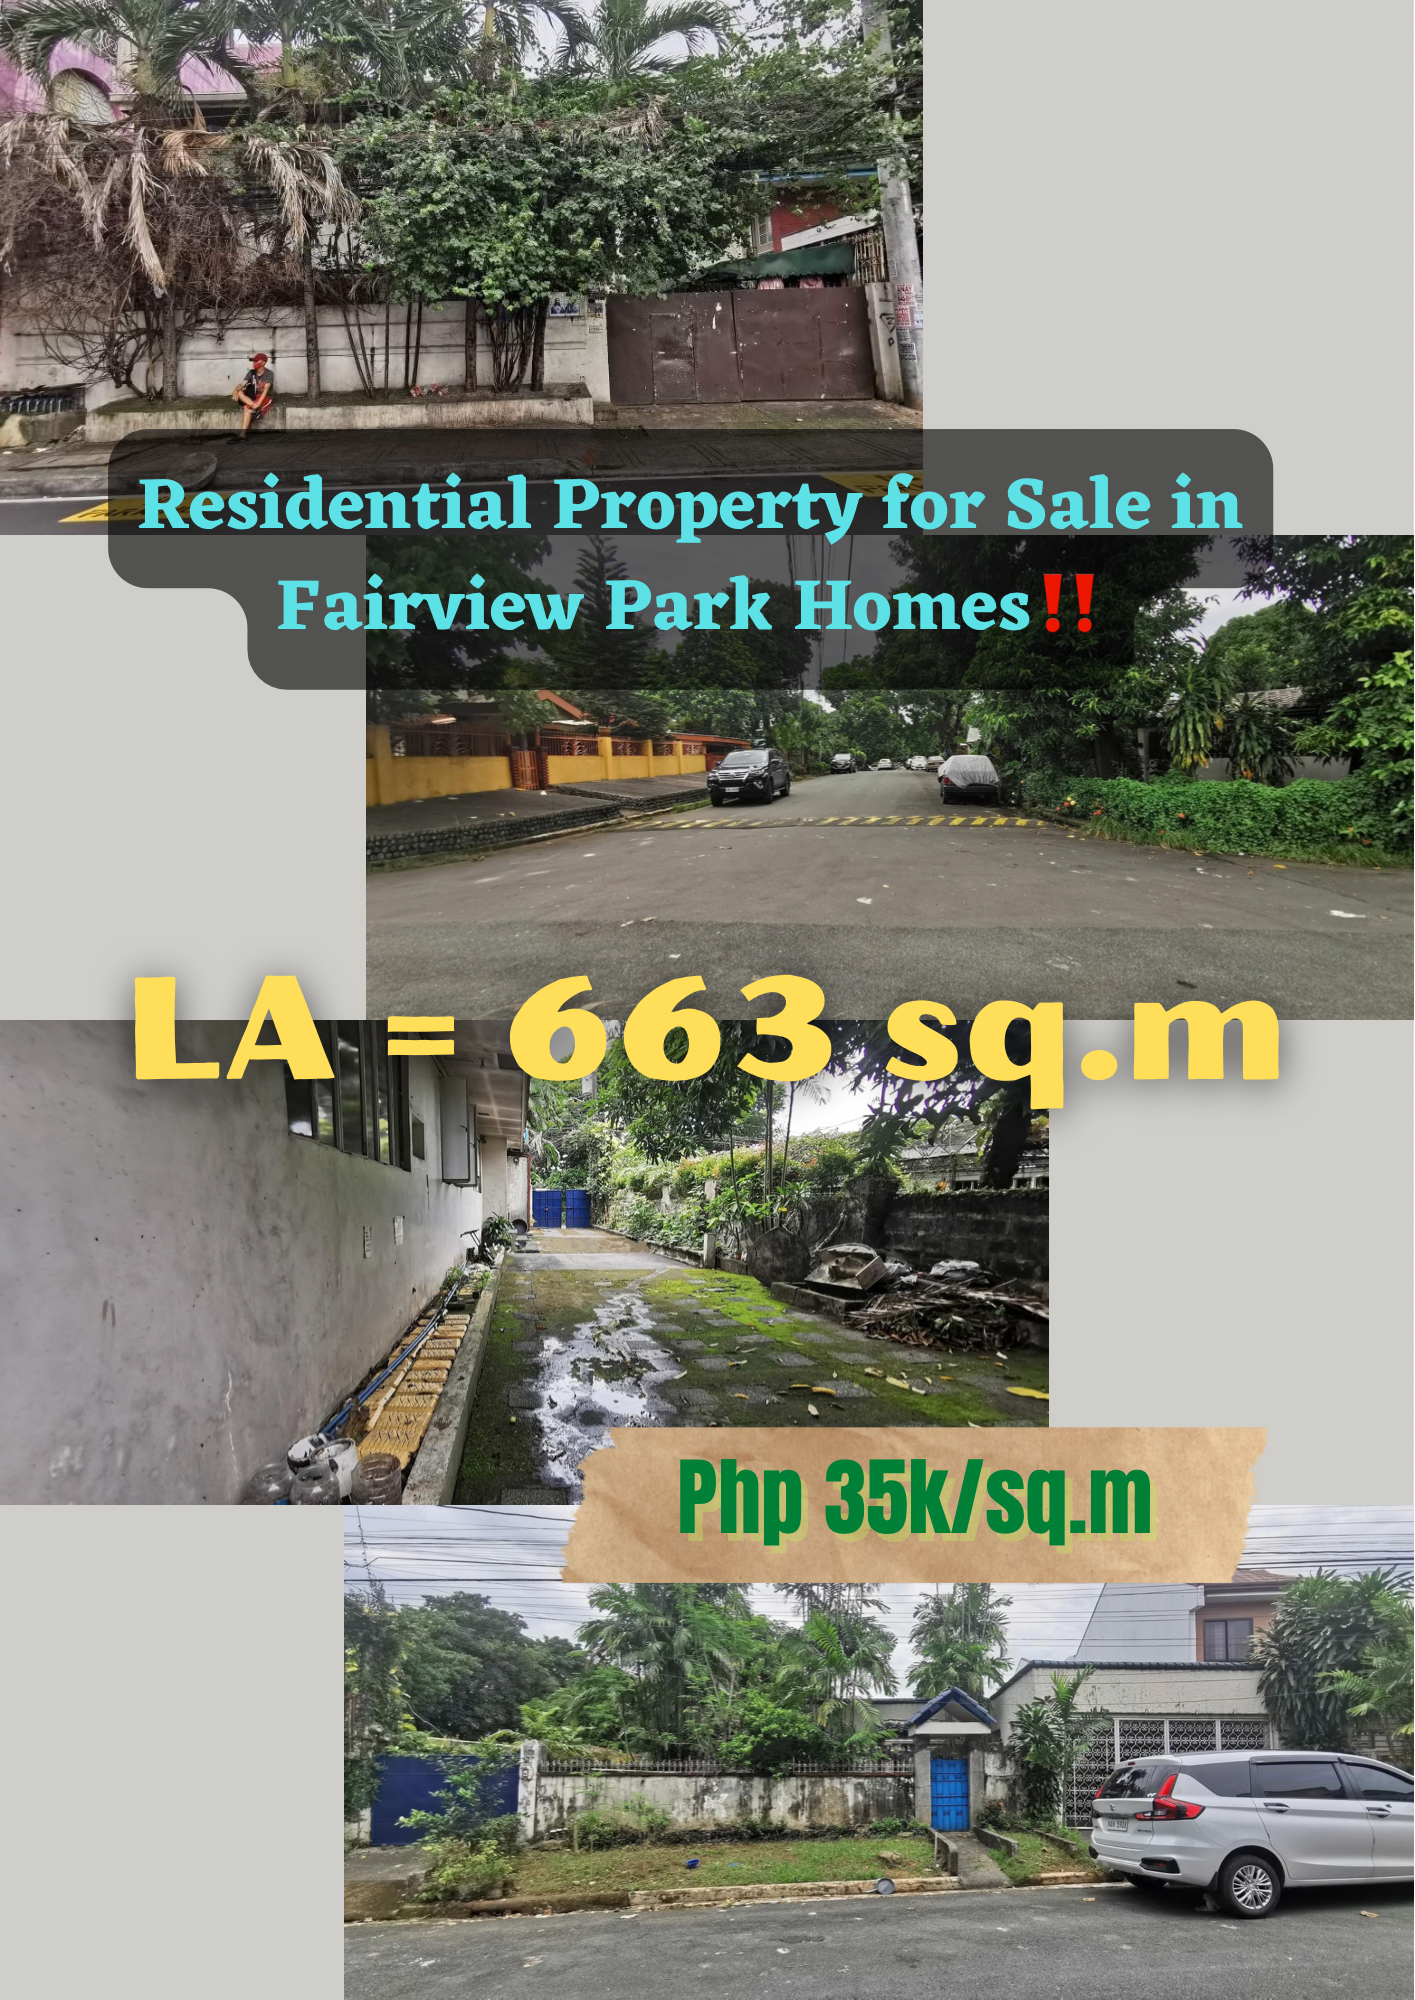 Residential Property for Sale in Fairview Park Homes, Quezon  City‼️